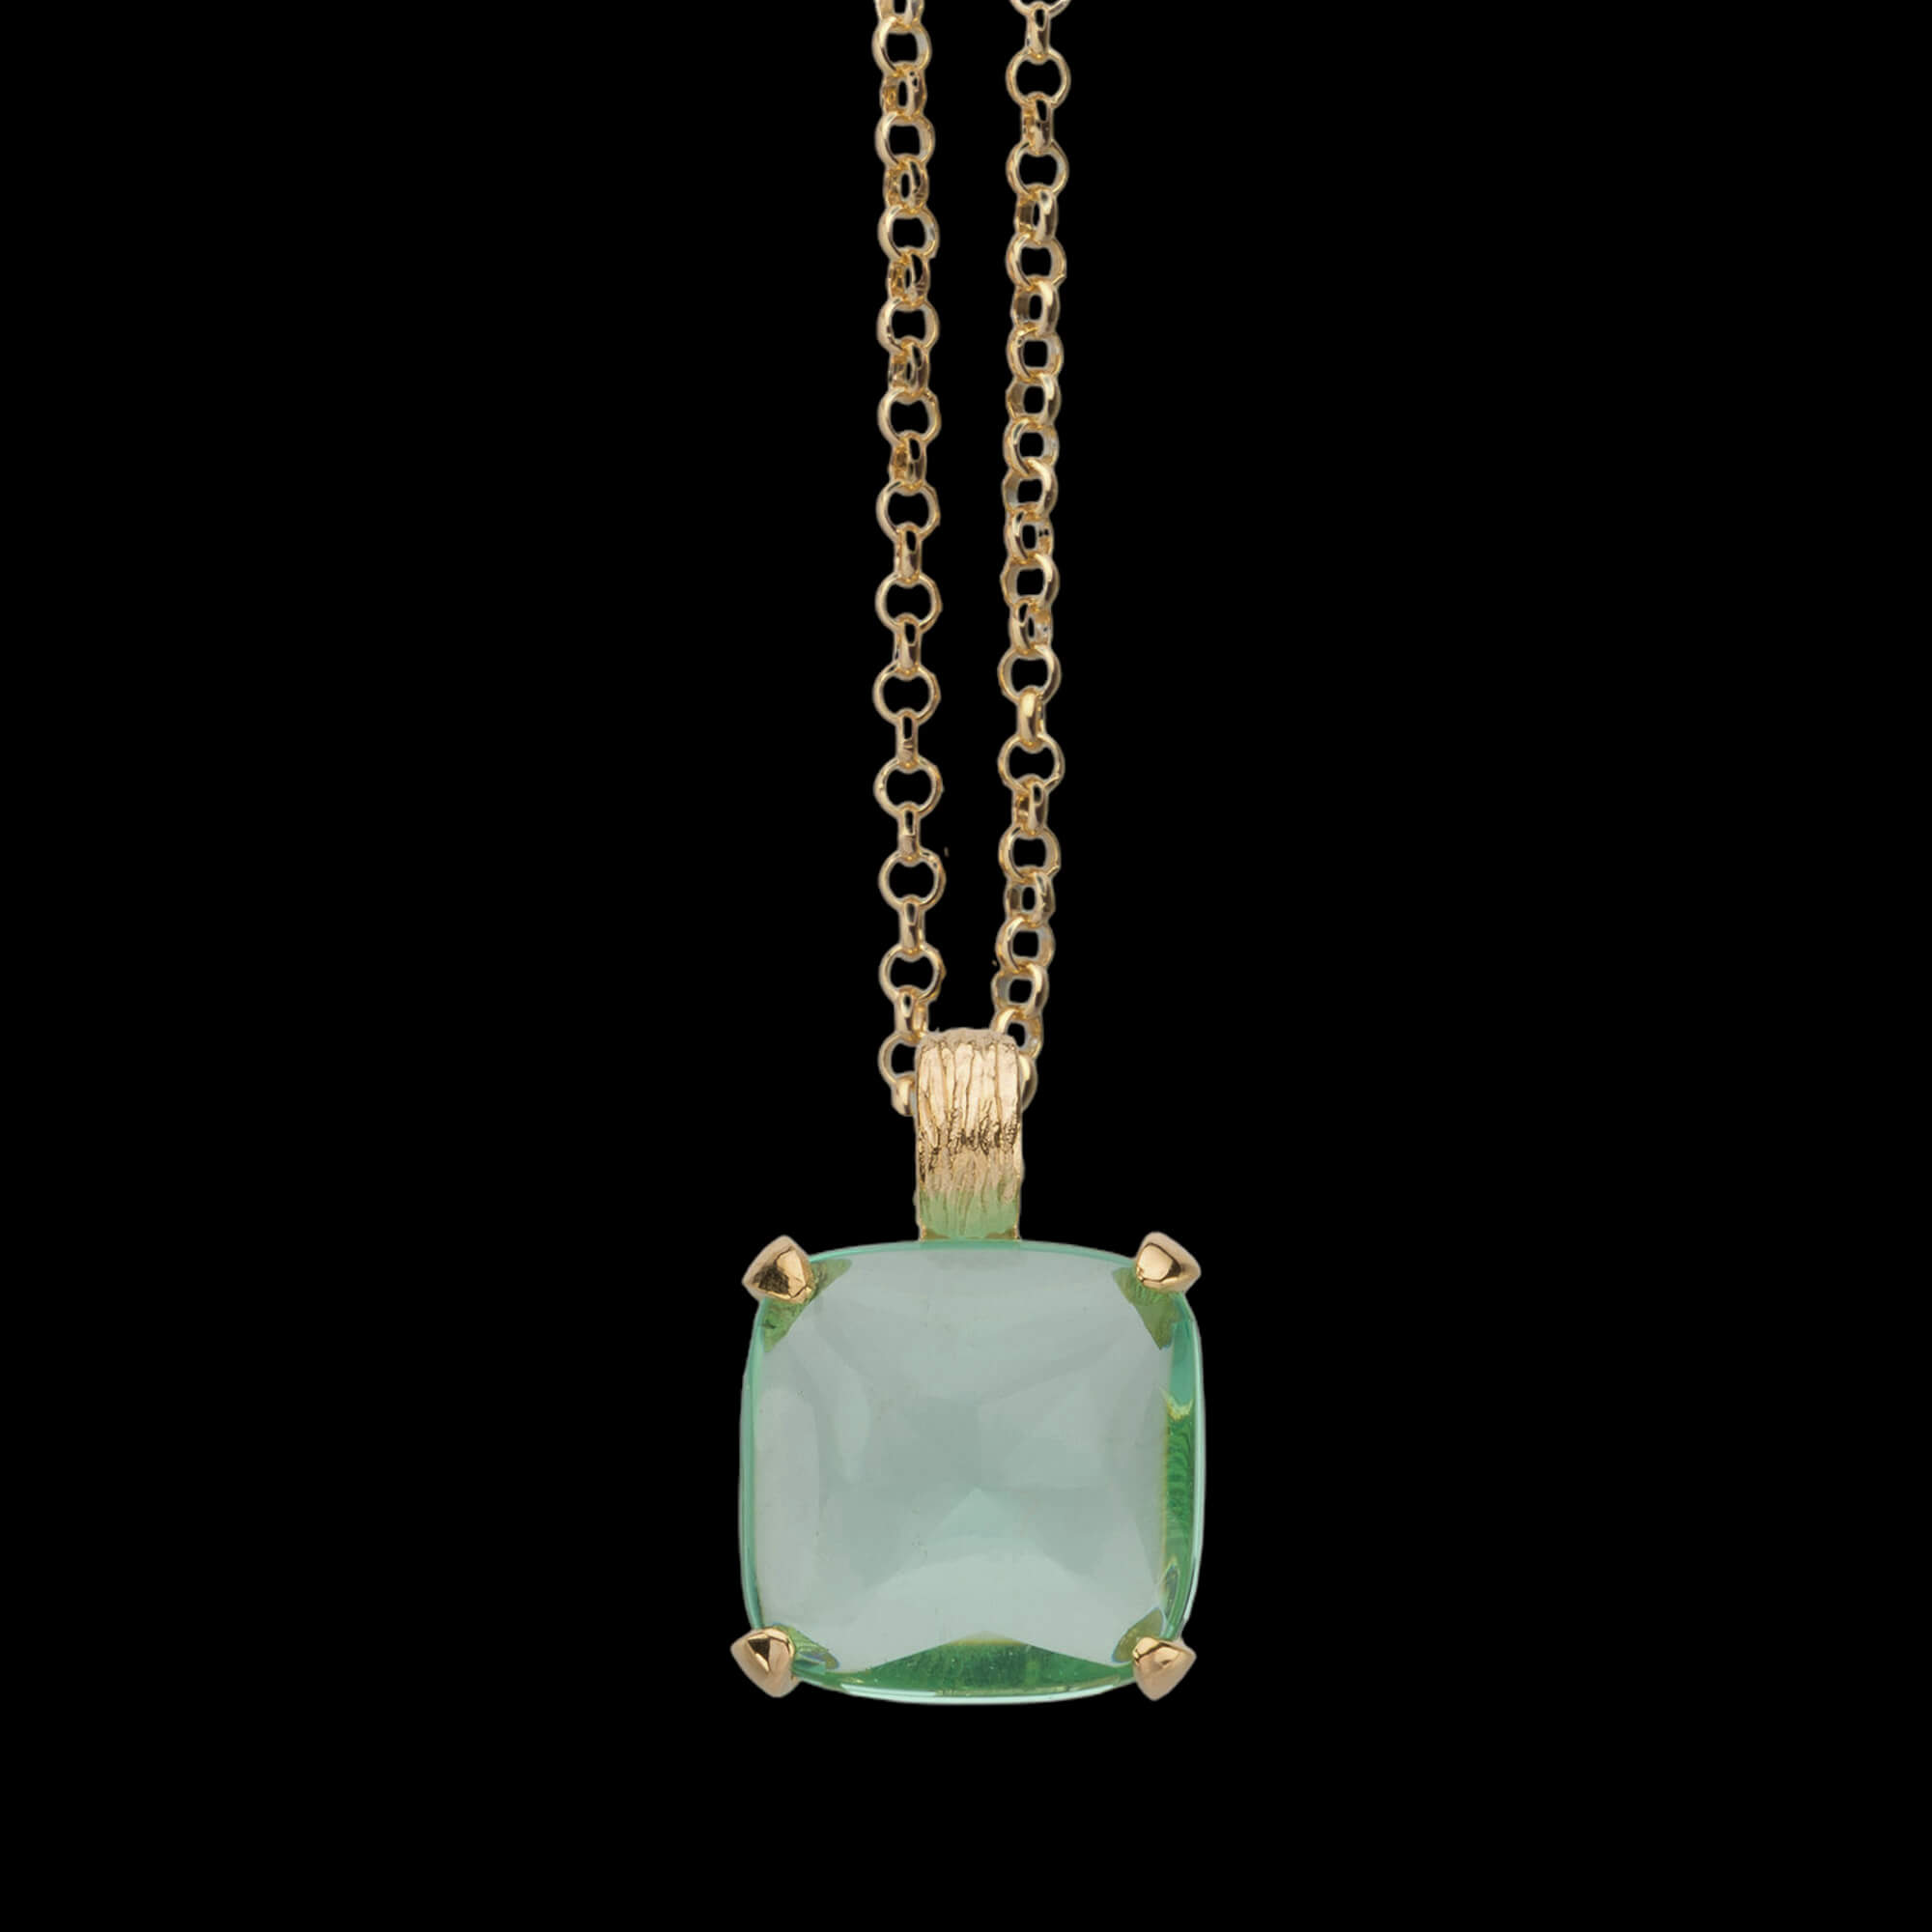 Green square -shaped pendant without a gilded necklace